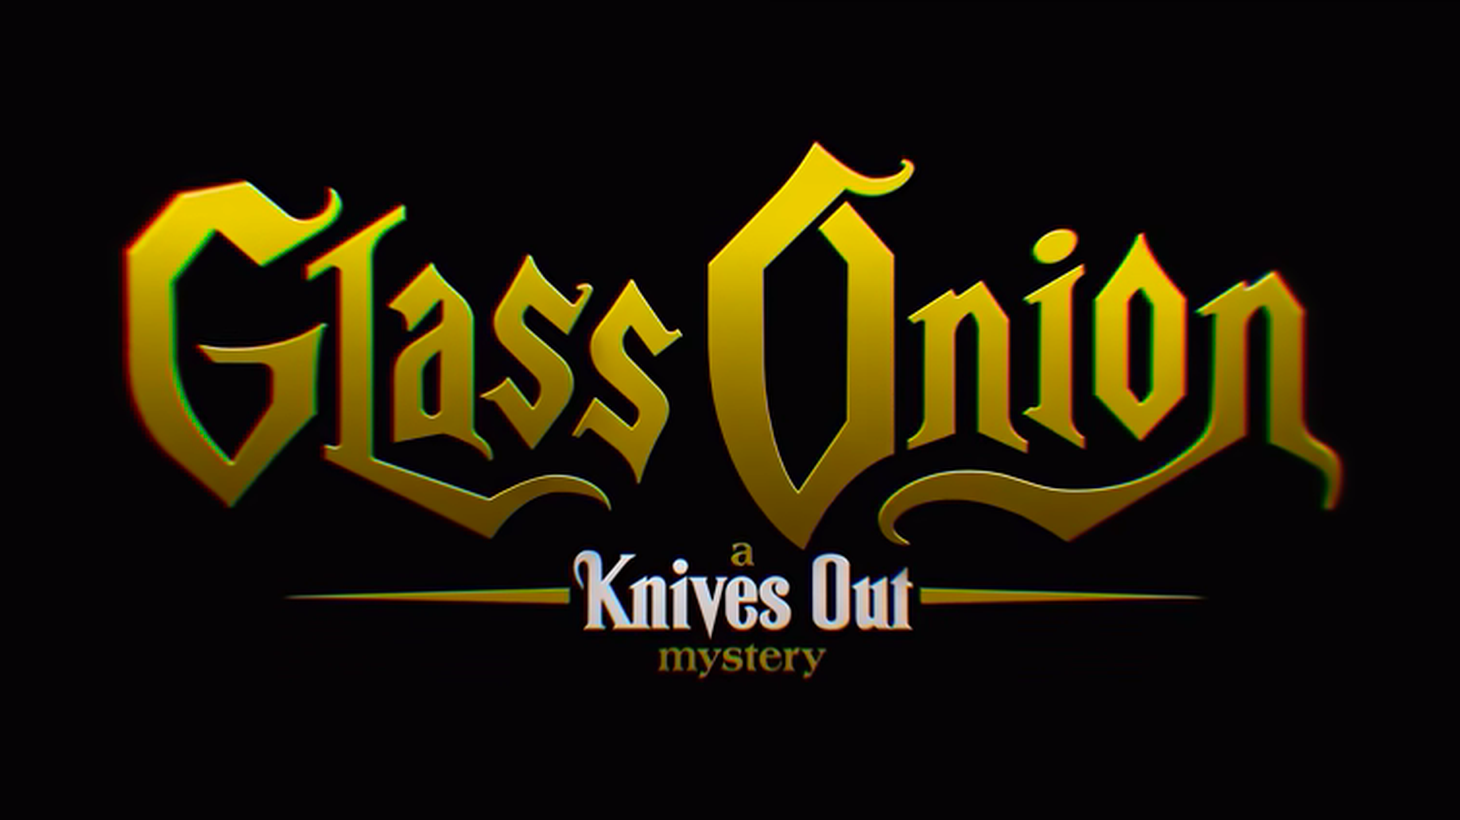 The film “Glass Onion: A Knives Out Mystery” made a fraction of its predecessor, which was widely distributed by Lionsgate.